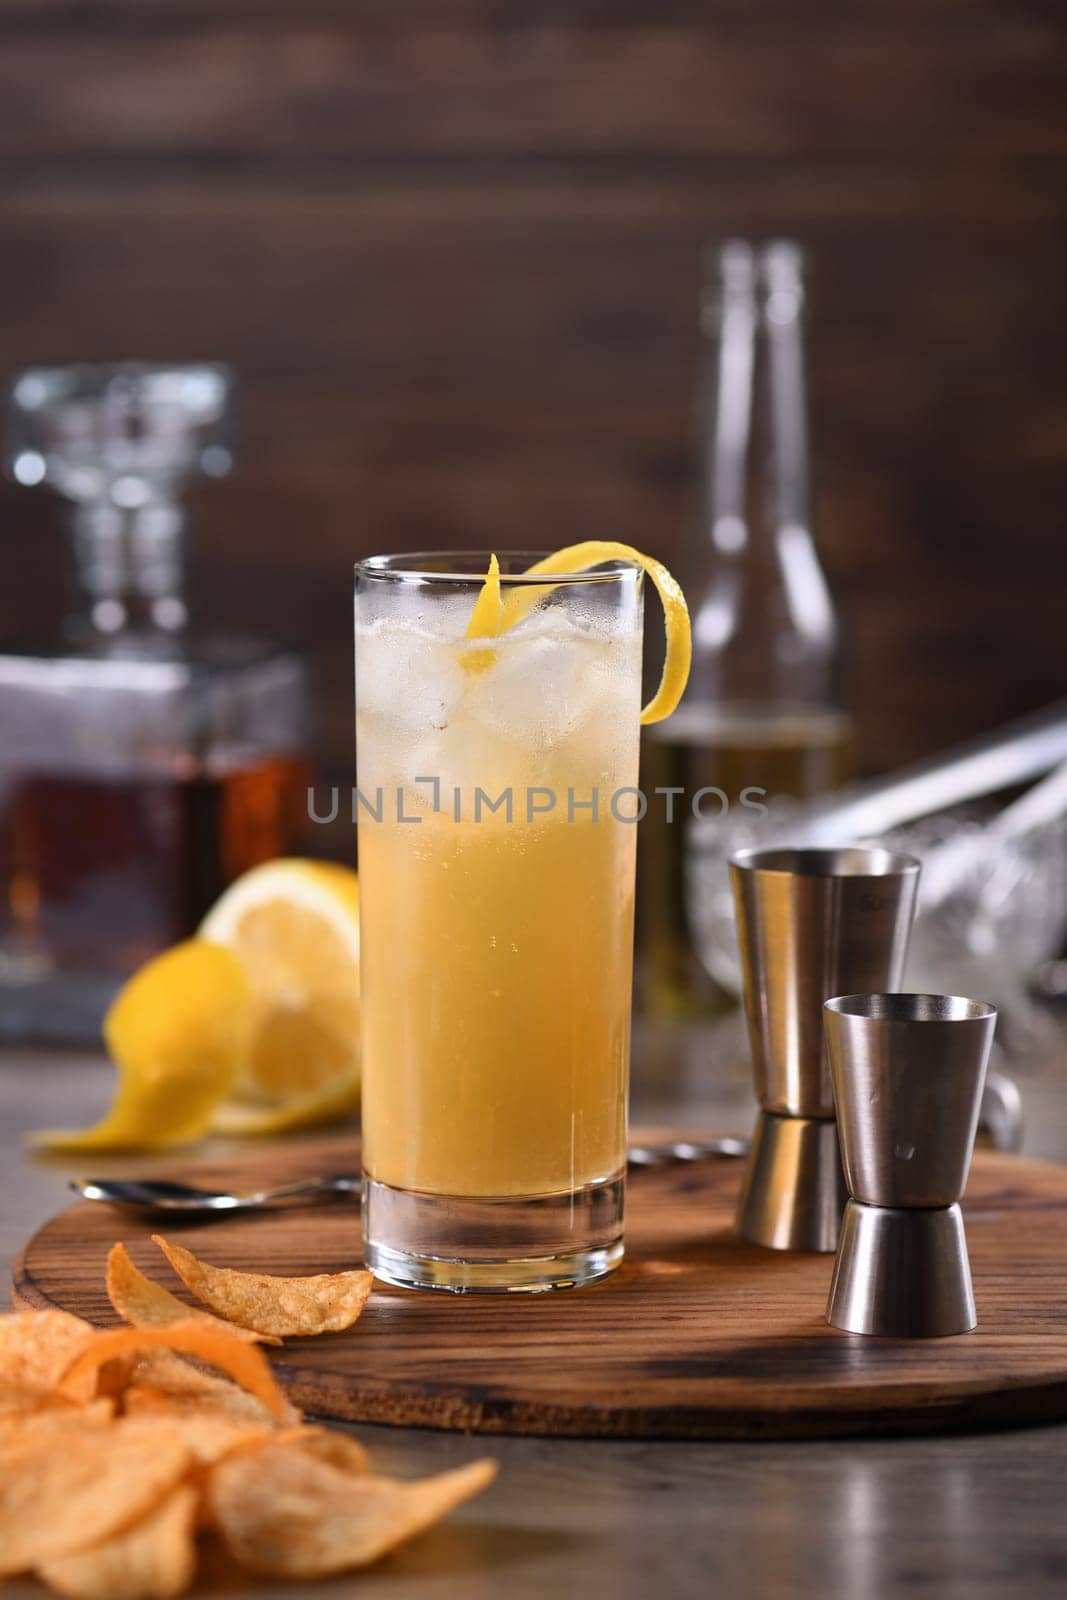  Whiskey cocktail with ginger beer, garnished with lemon zest